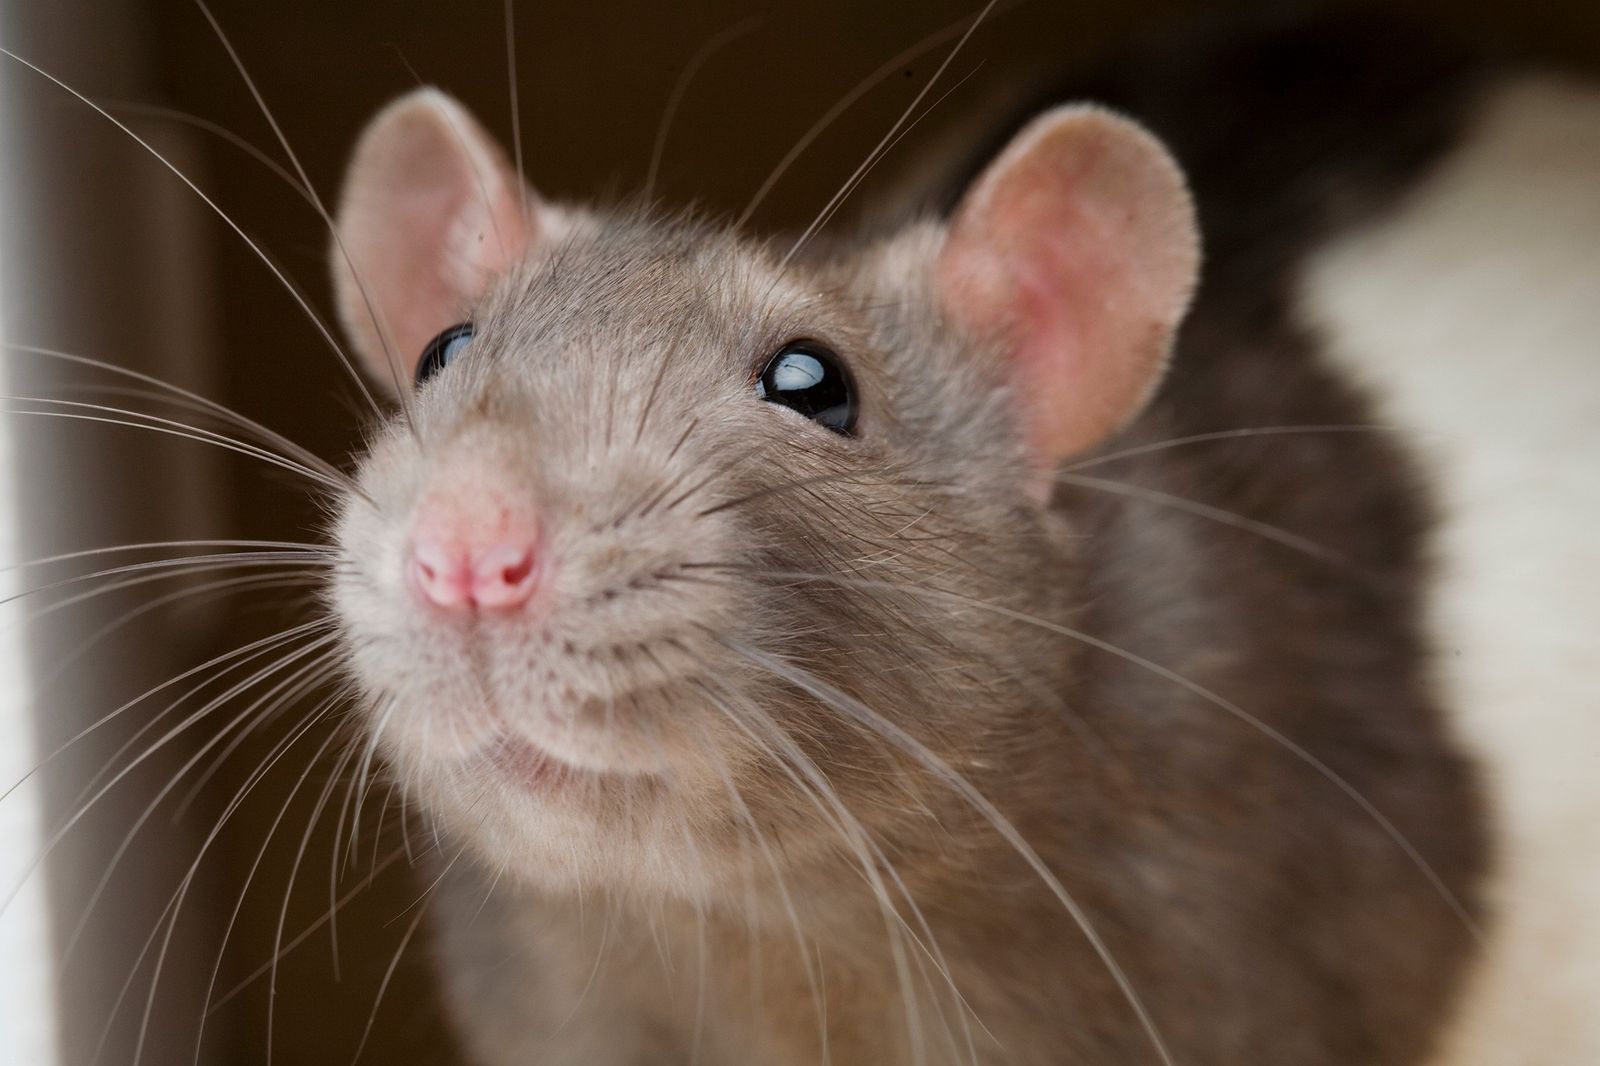 Pest controllers warn rats &#8216;as big as cats&#8217; are sneaking into UK homes through toilets, The Manc